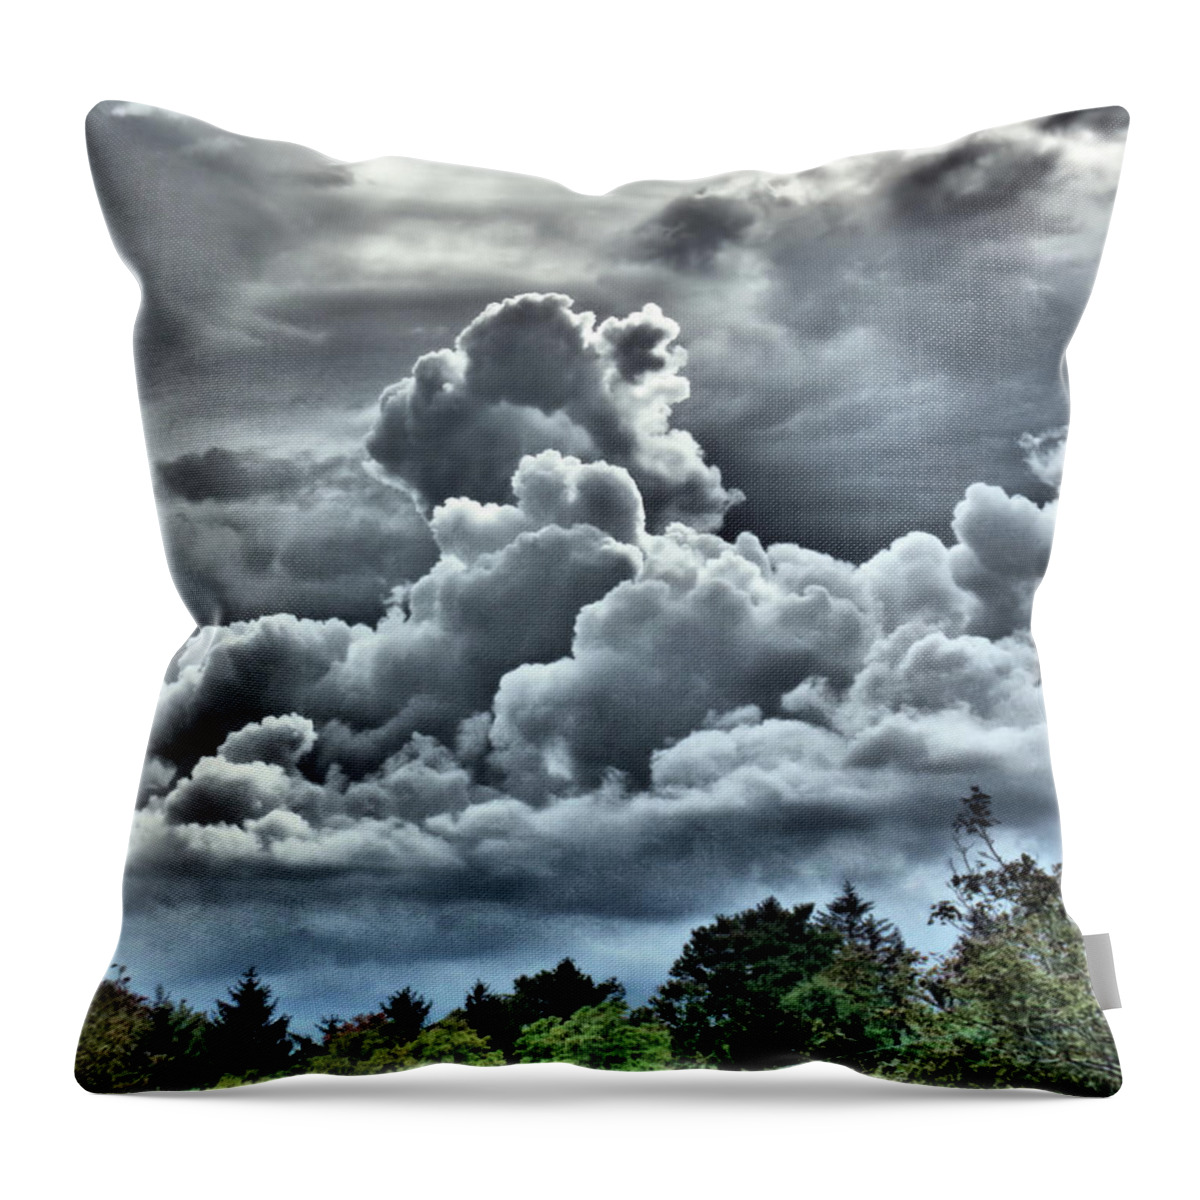 Clouds Throw Pillow featuring the photograph Approaching Rainstorm by Christopher Reed